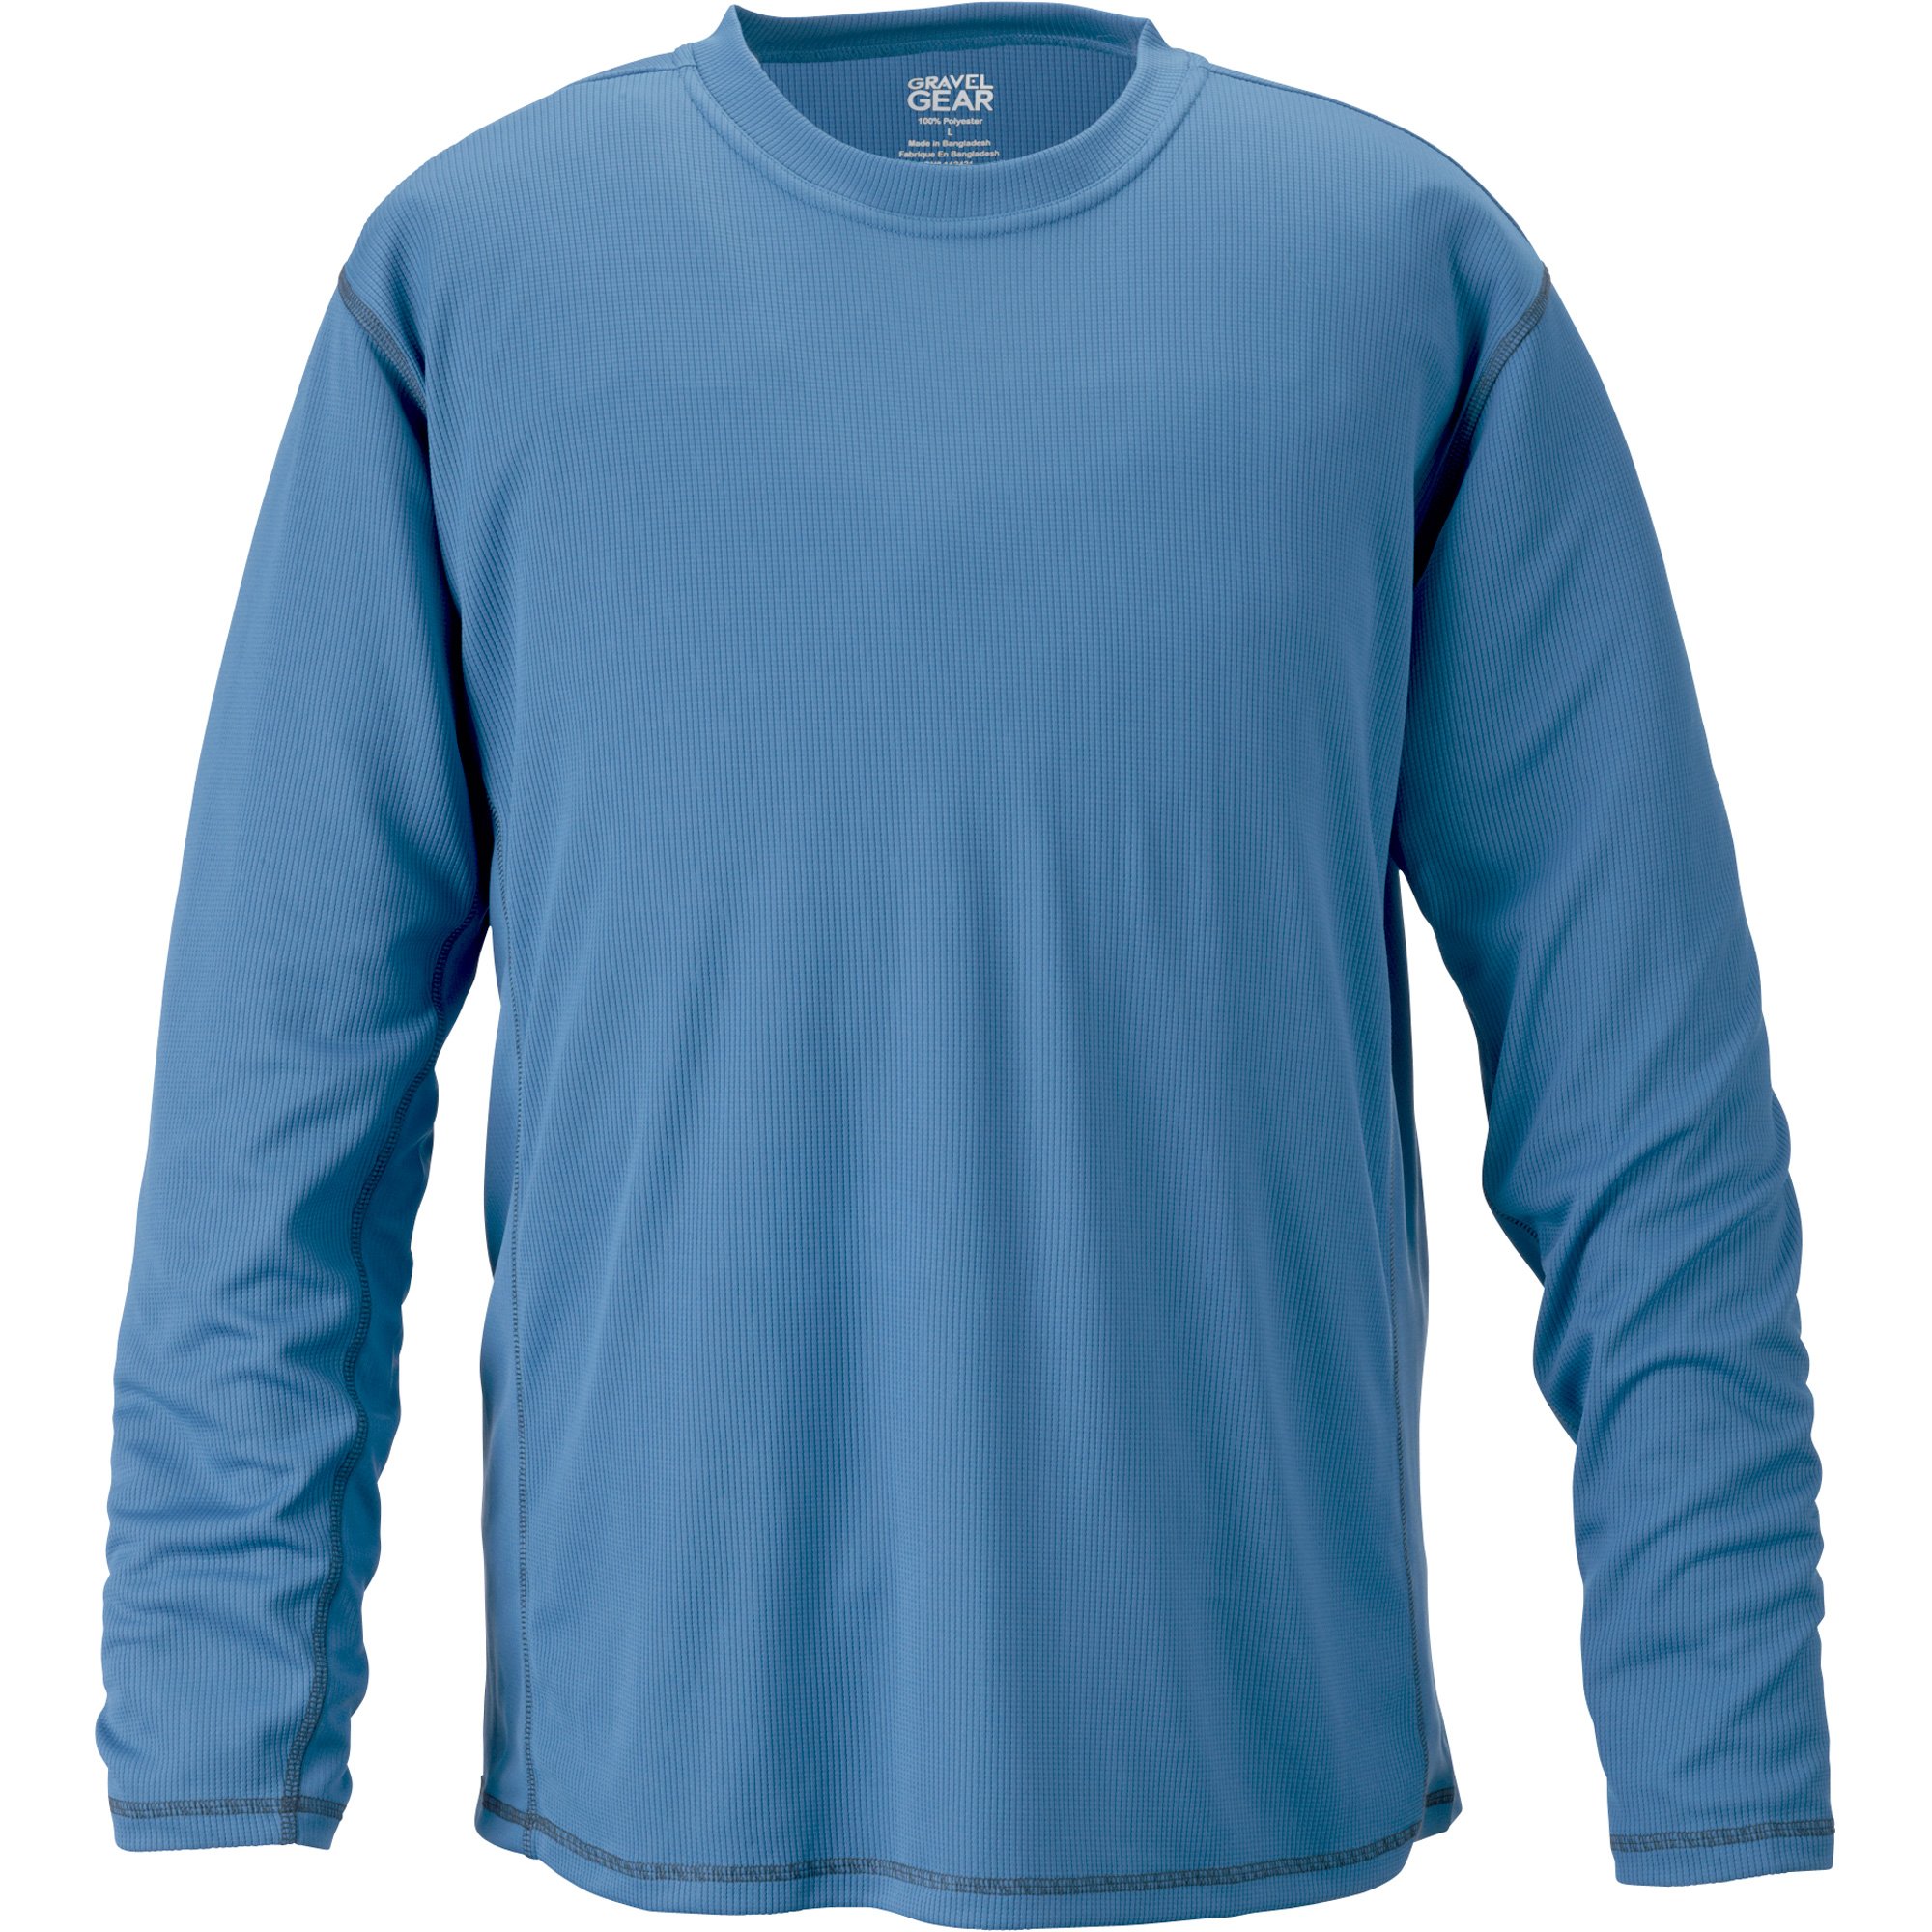 Coolmax Quick Dry Knit Fabric Sportswear Performance T-shirt from